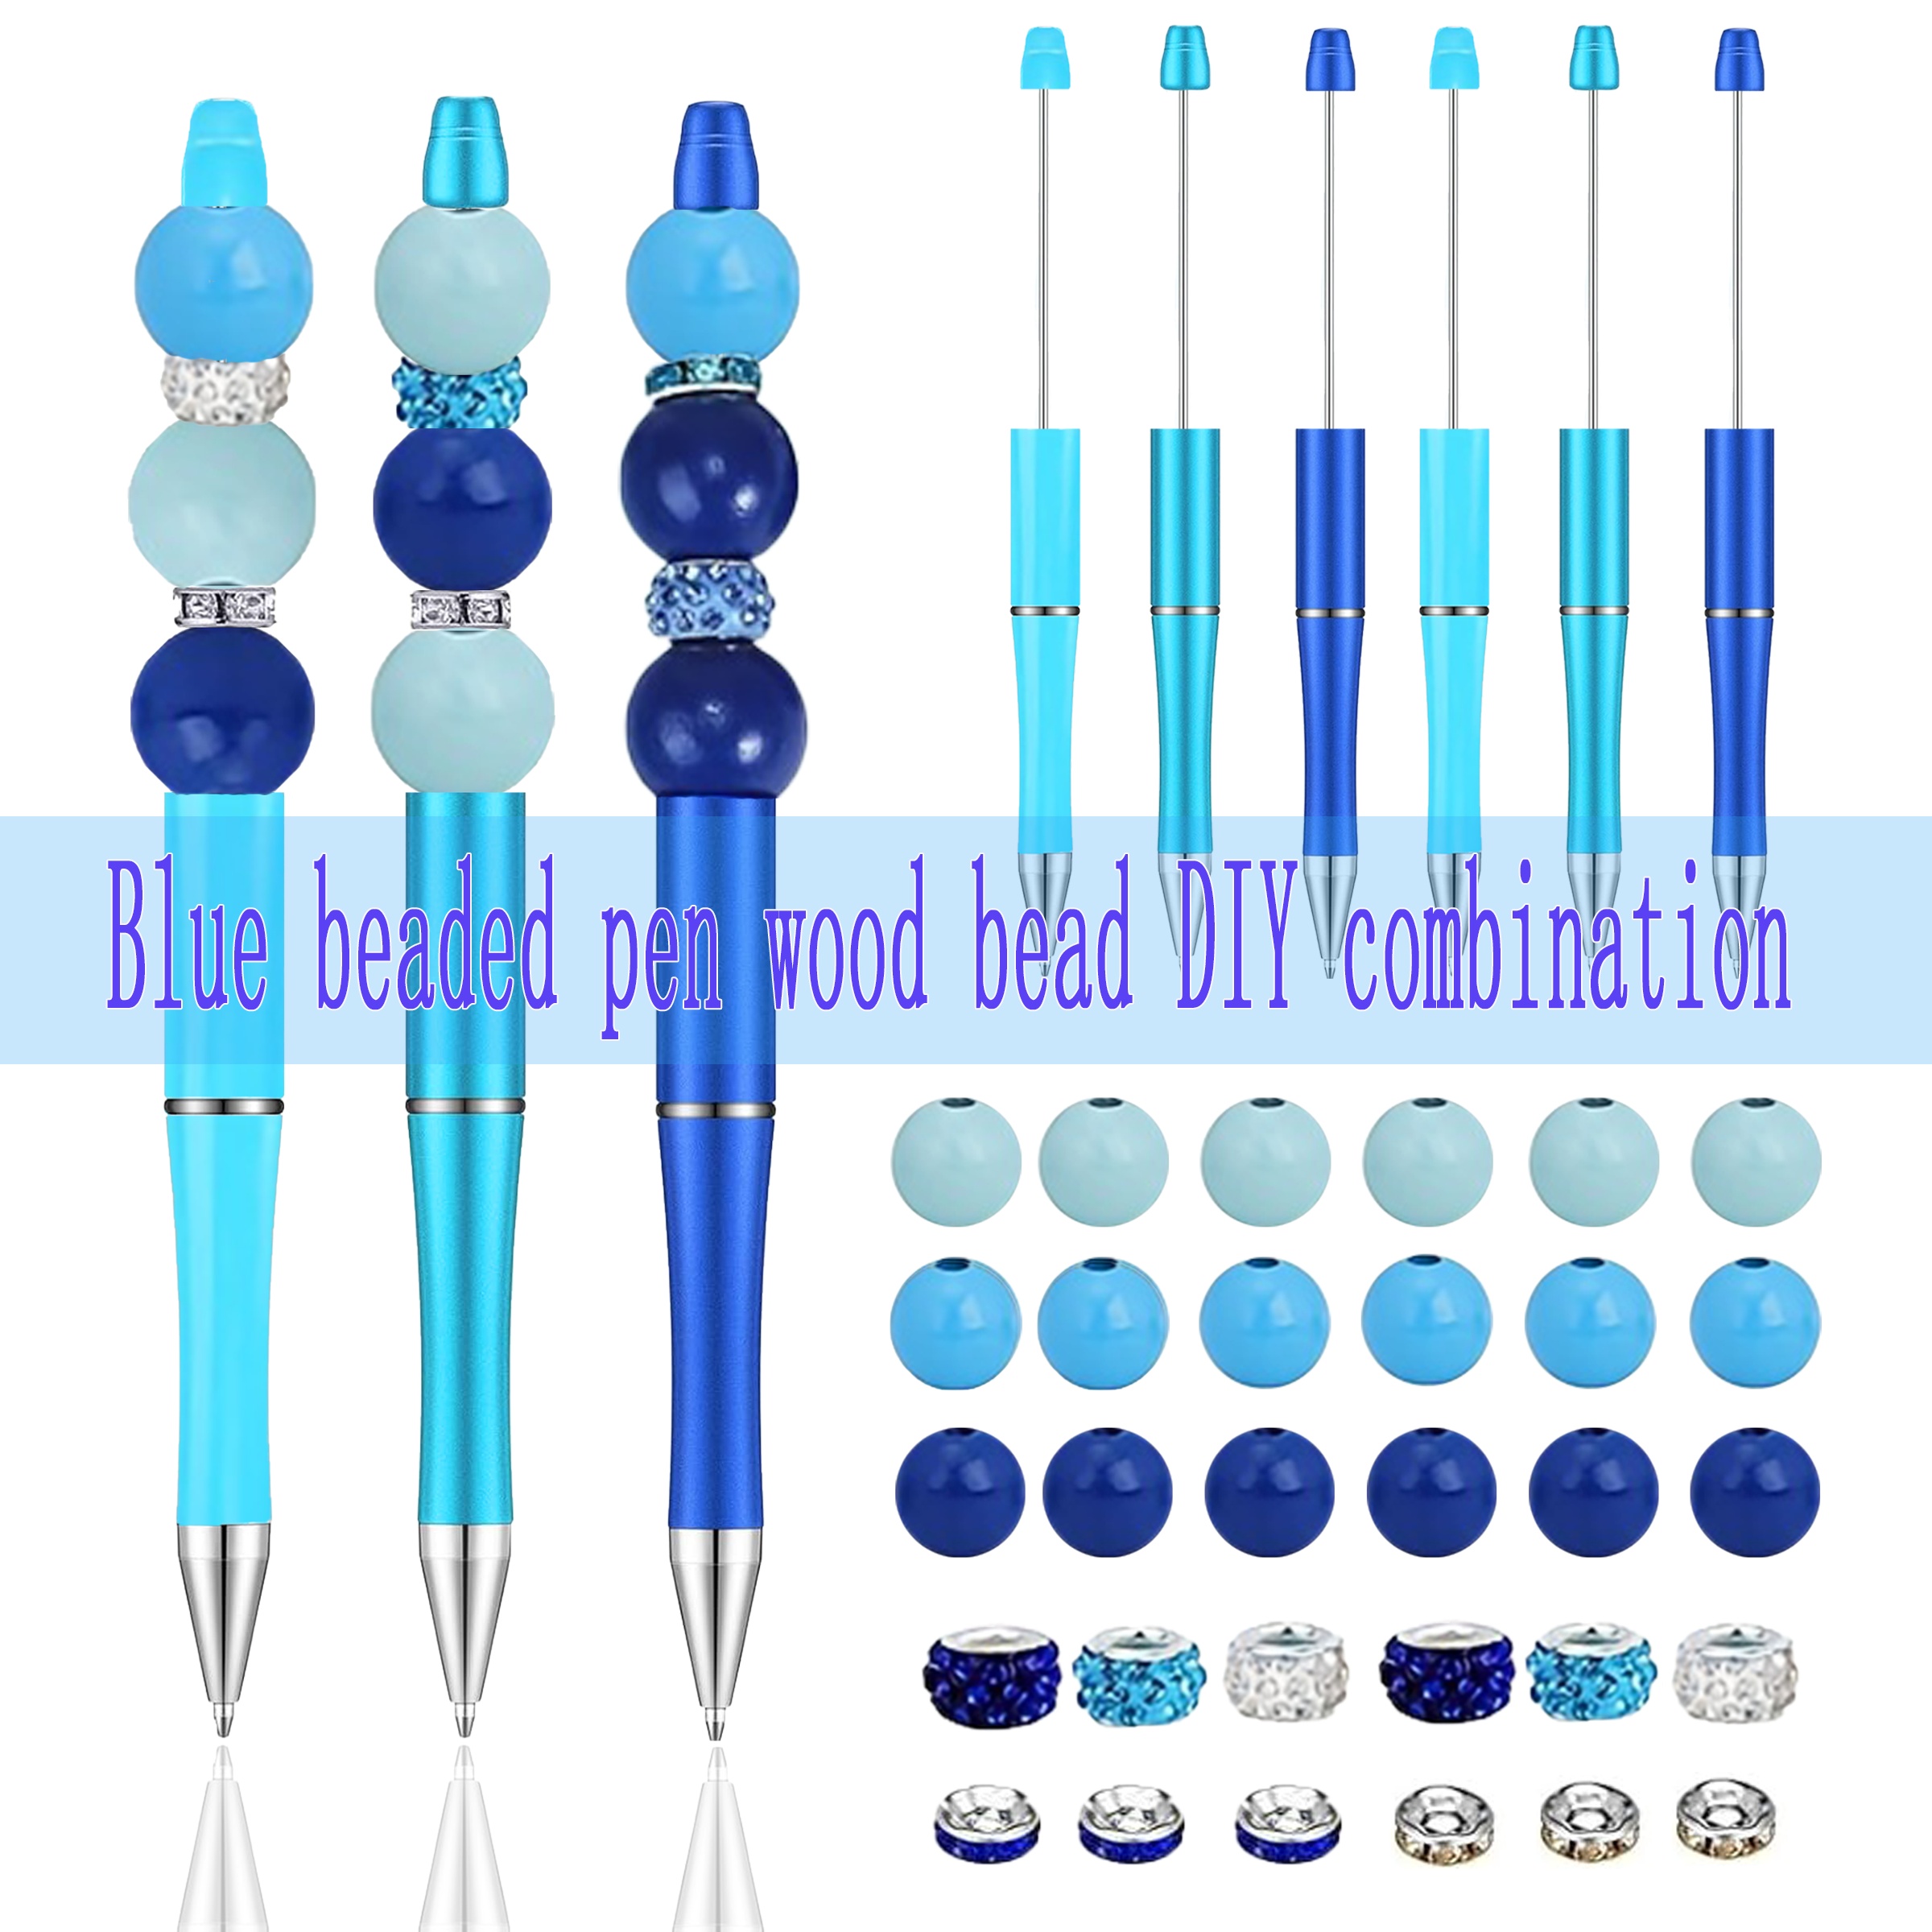 

36pcs Blue Beaded Pen Wood Bead Diy Combination, 6 Beaded Pens, Black Ink, Multiple Blue Wood Beads, Holiday Parties, Home Office Available